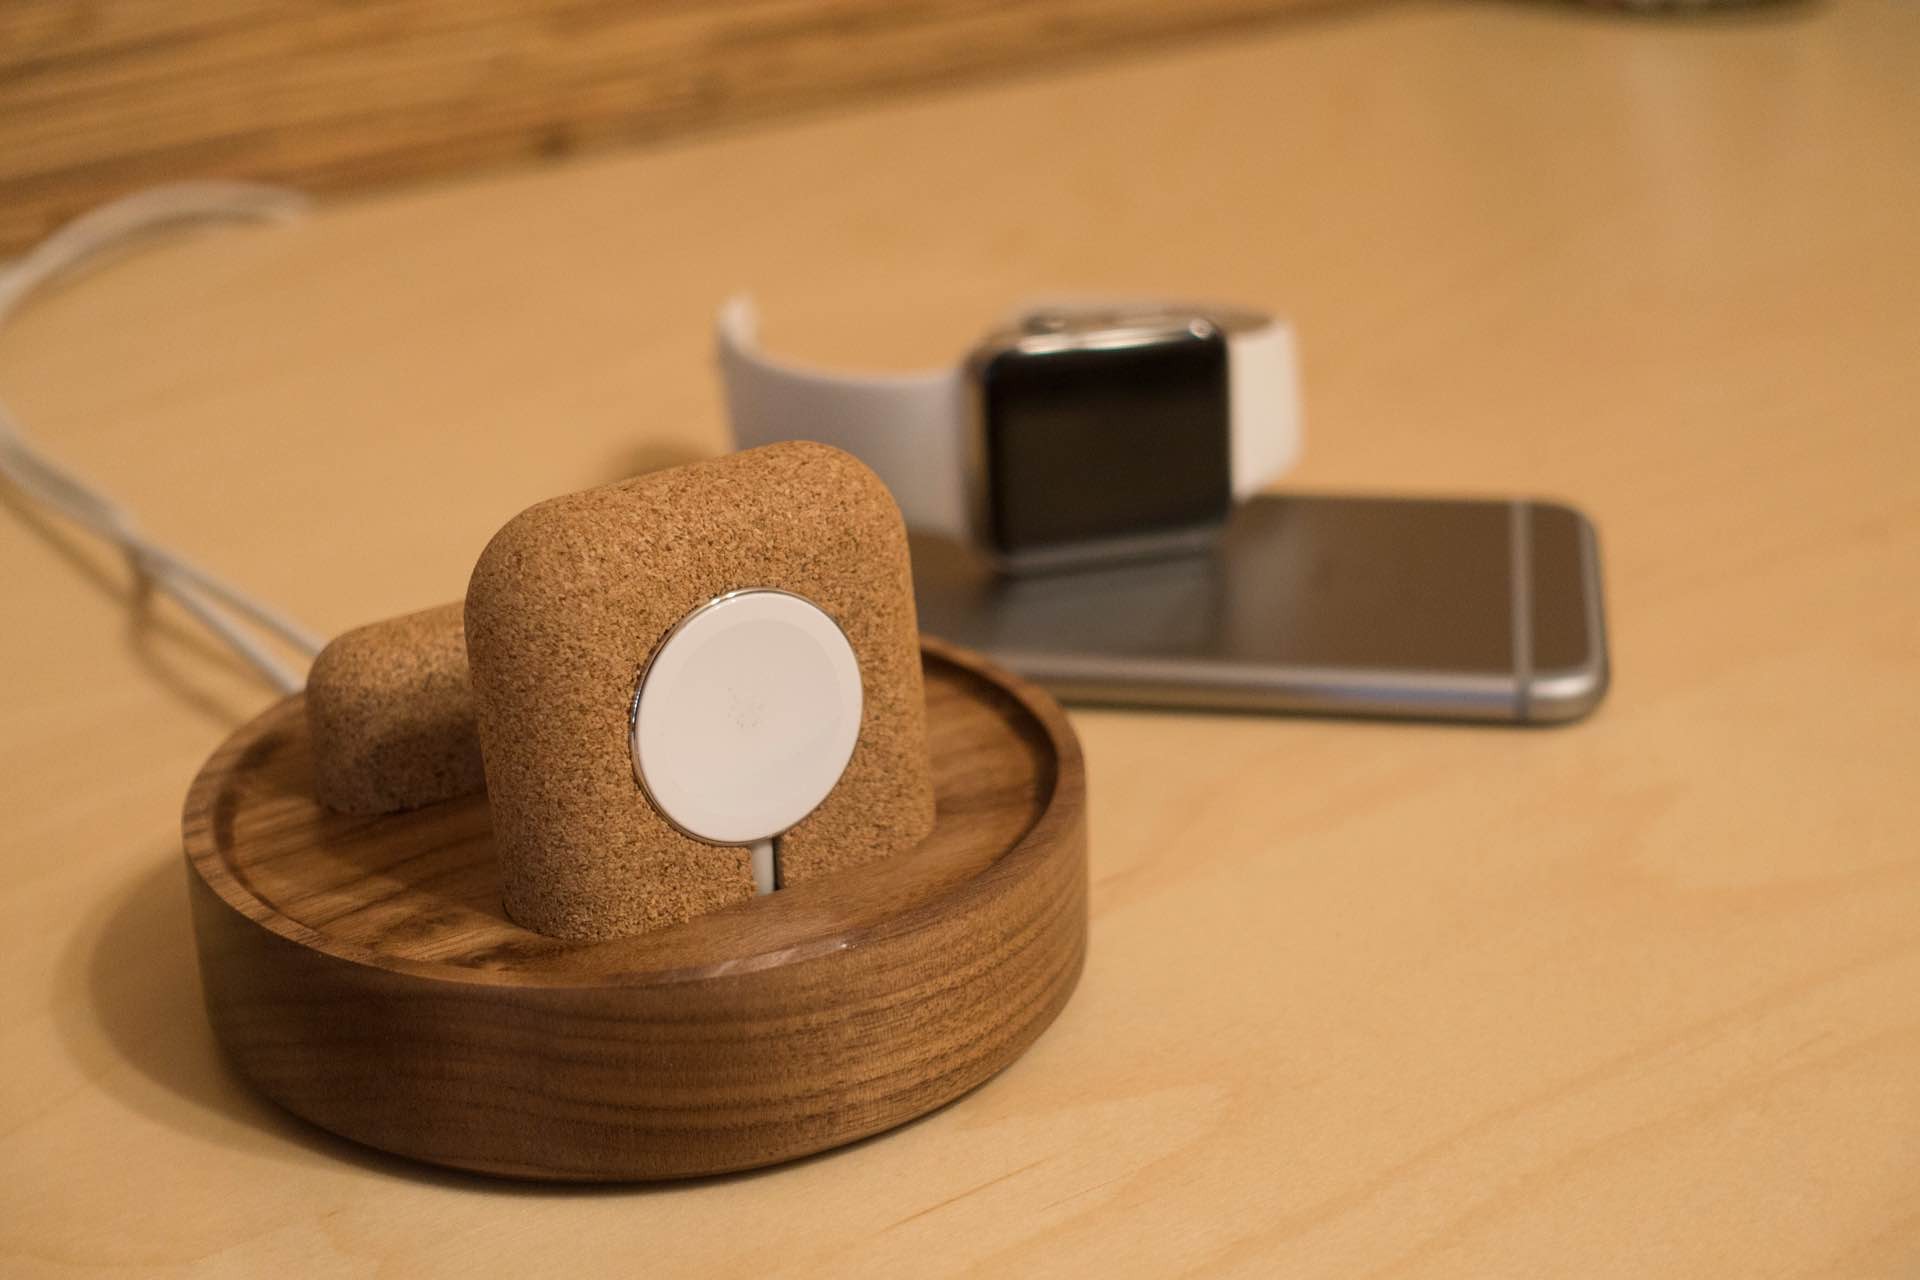 Studio Neat's Material Dock for iPhone and Apple Watch. ($45–$95 depending on configuration)